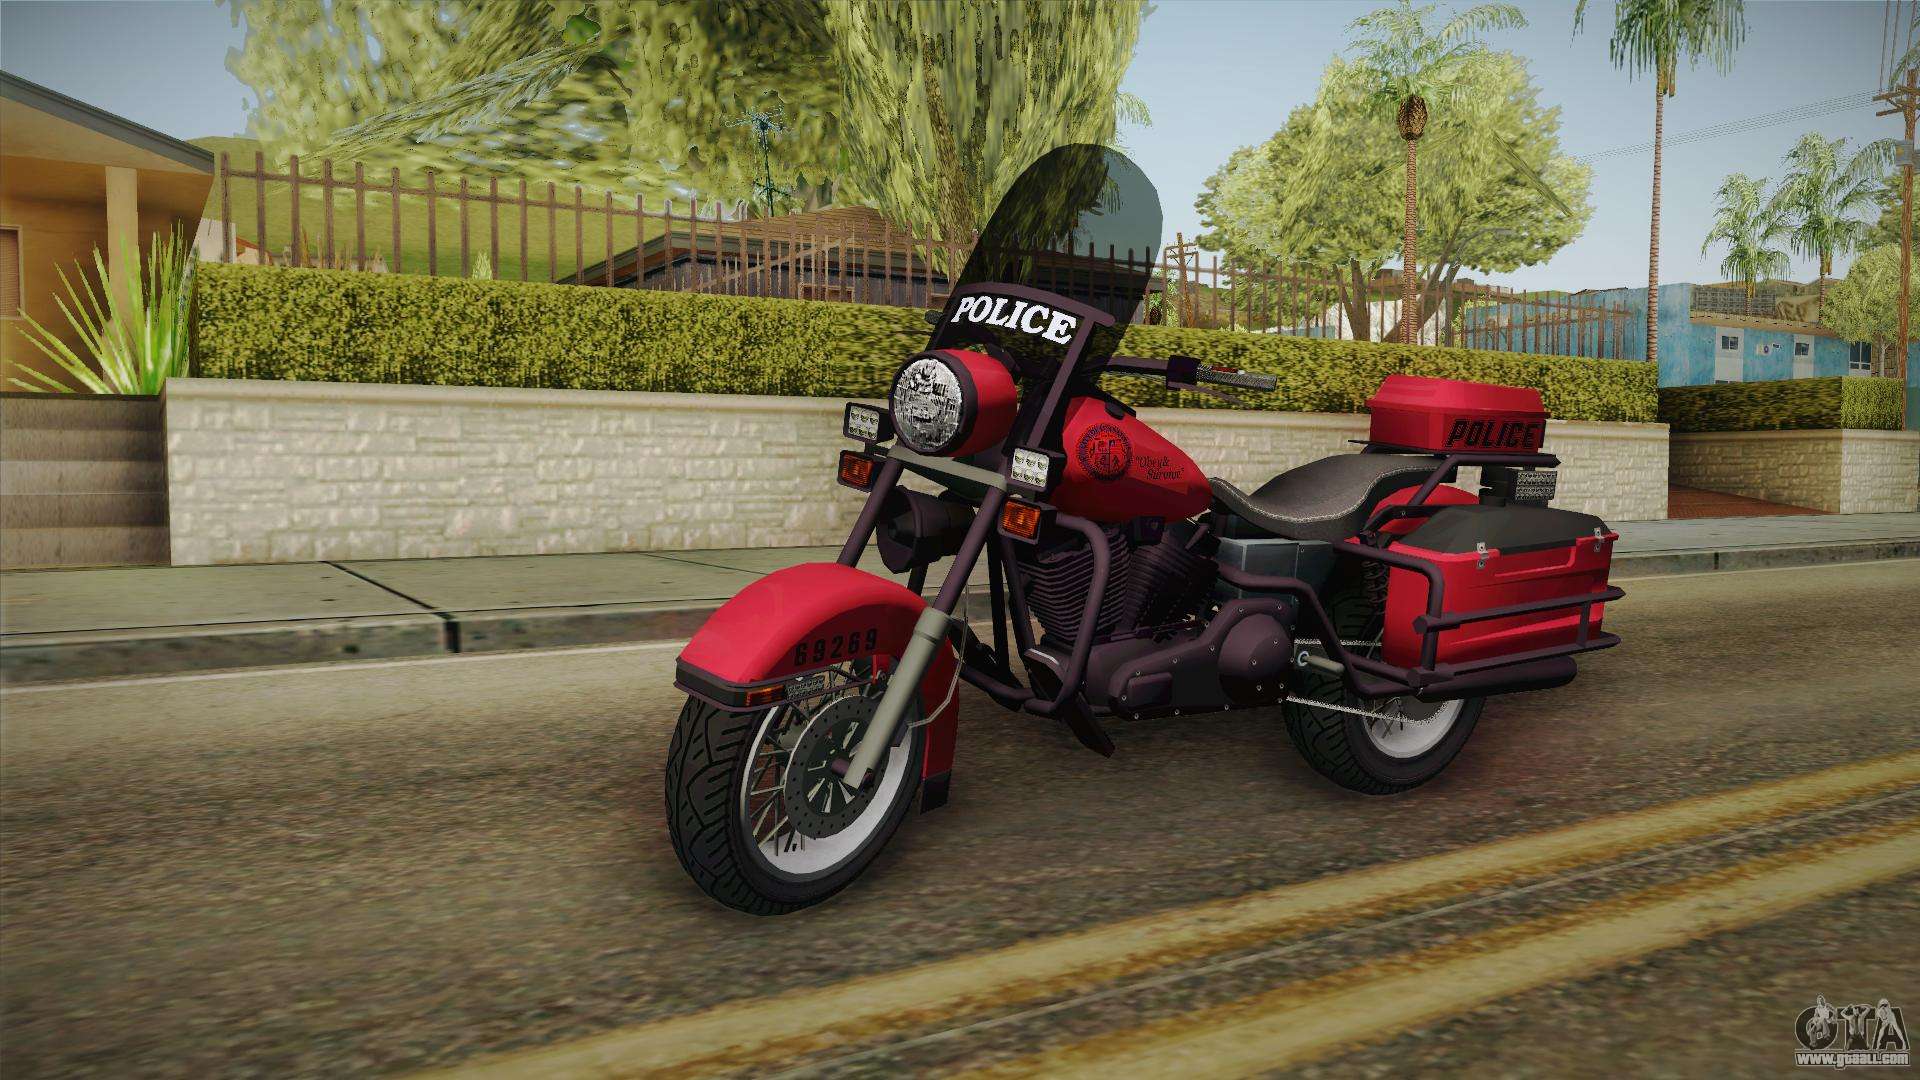 Gta 5 Cheats Xbox 360 Police Motorcycle Motorcycle For Life